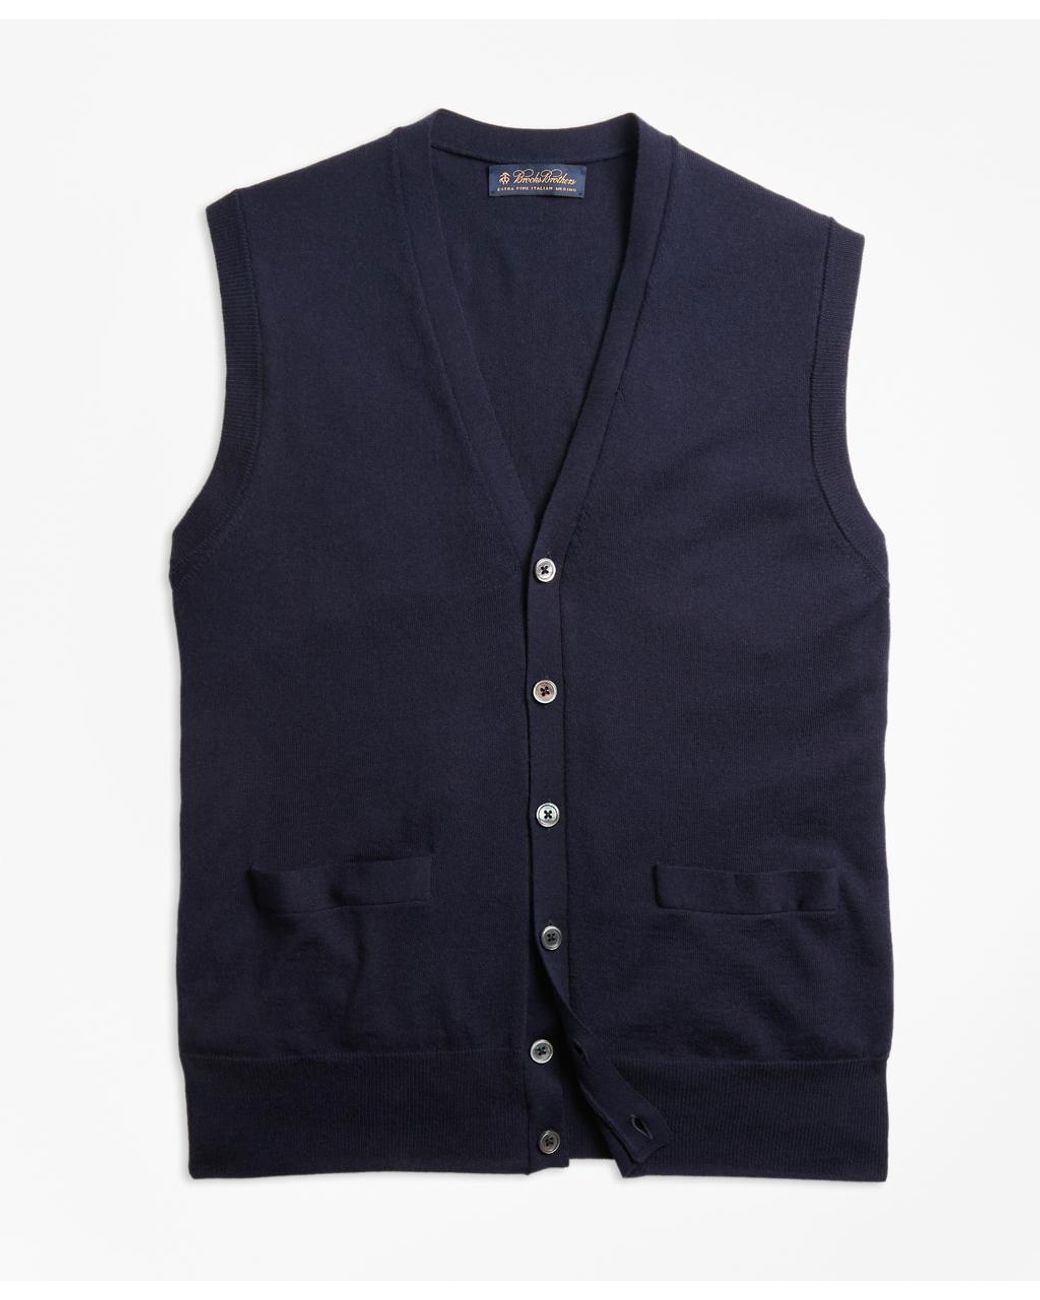 Brooks Brothers Brookstechtm Merino Wool Button-front Vest in Navy ...